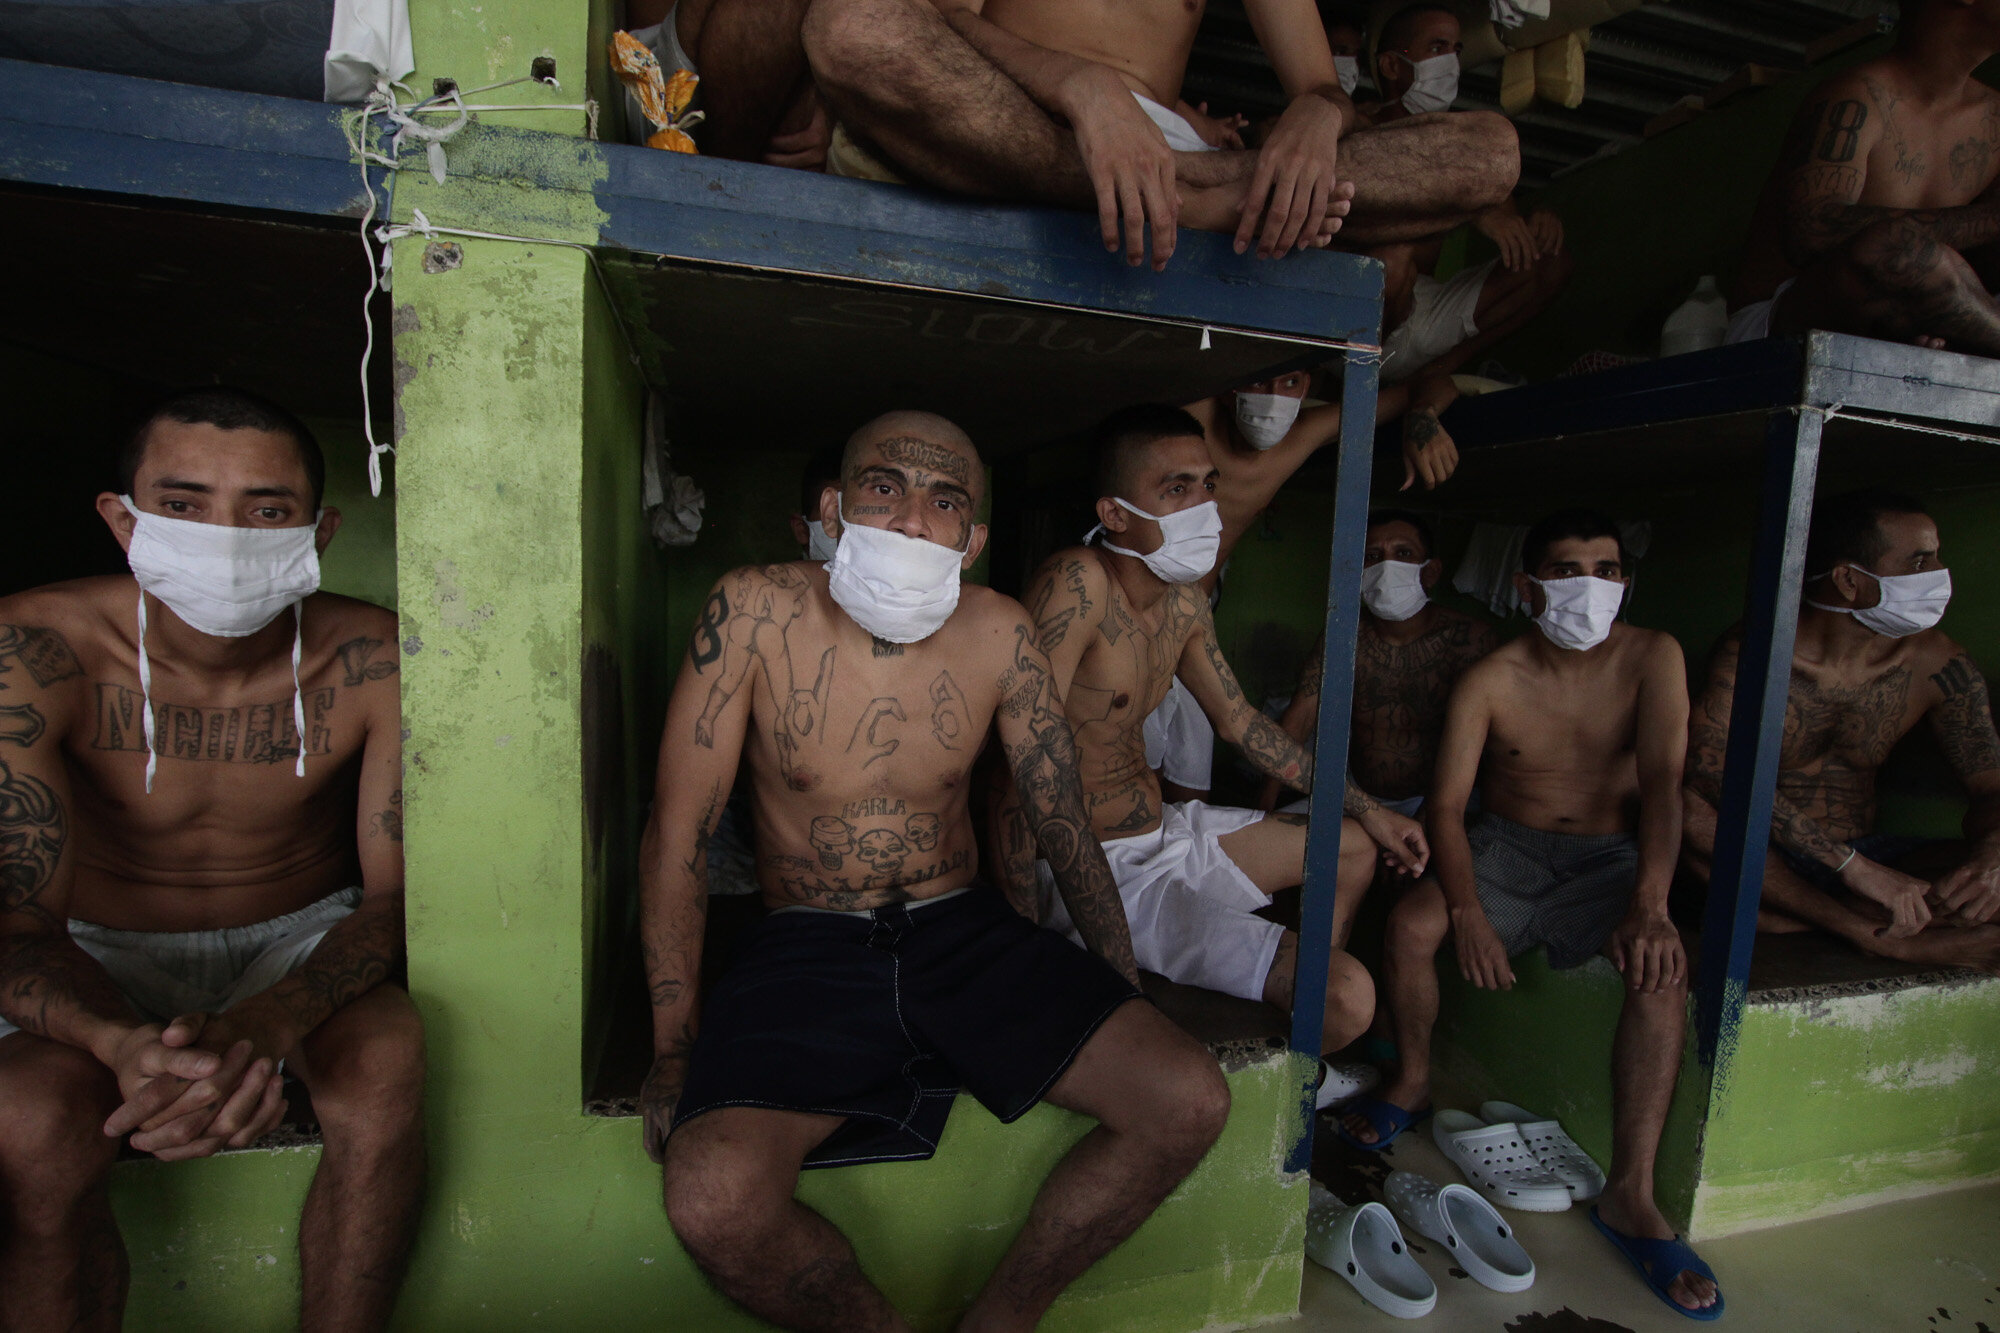  Imprisoned gang members, wearing protective face masks, sit inside a group cell during a media tour of the prison in Quezaltepeque, El Salvador, on Sept. 4, 2020. (AP Photo/Salvador Melendez) 